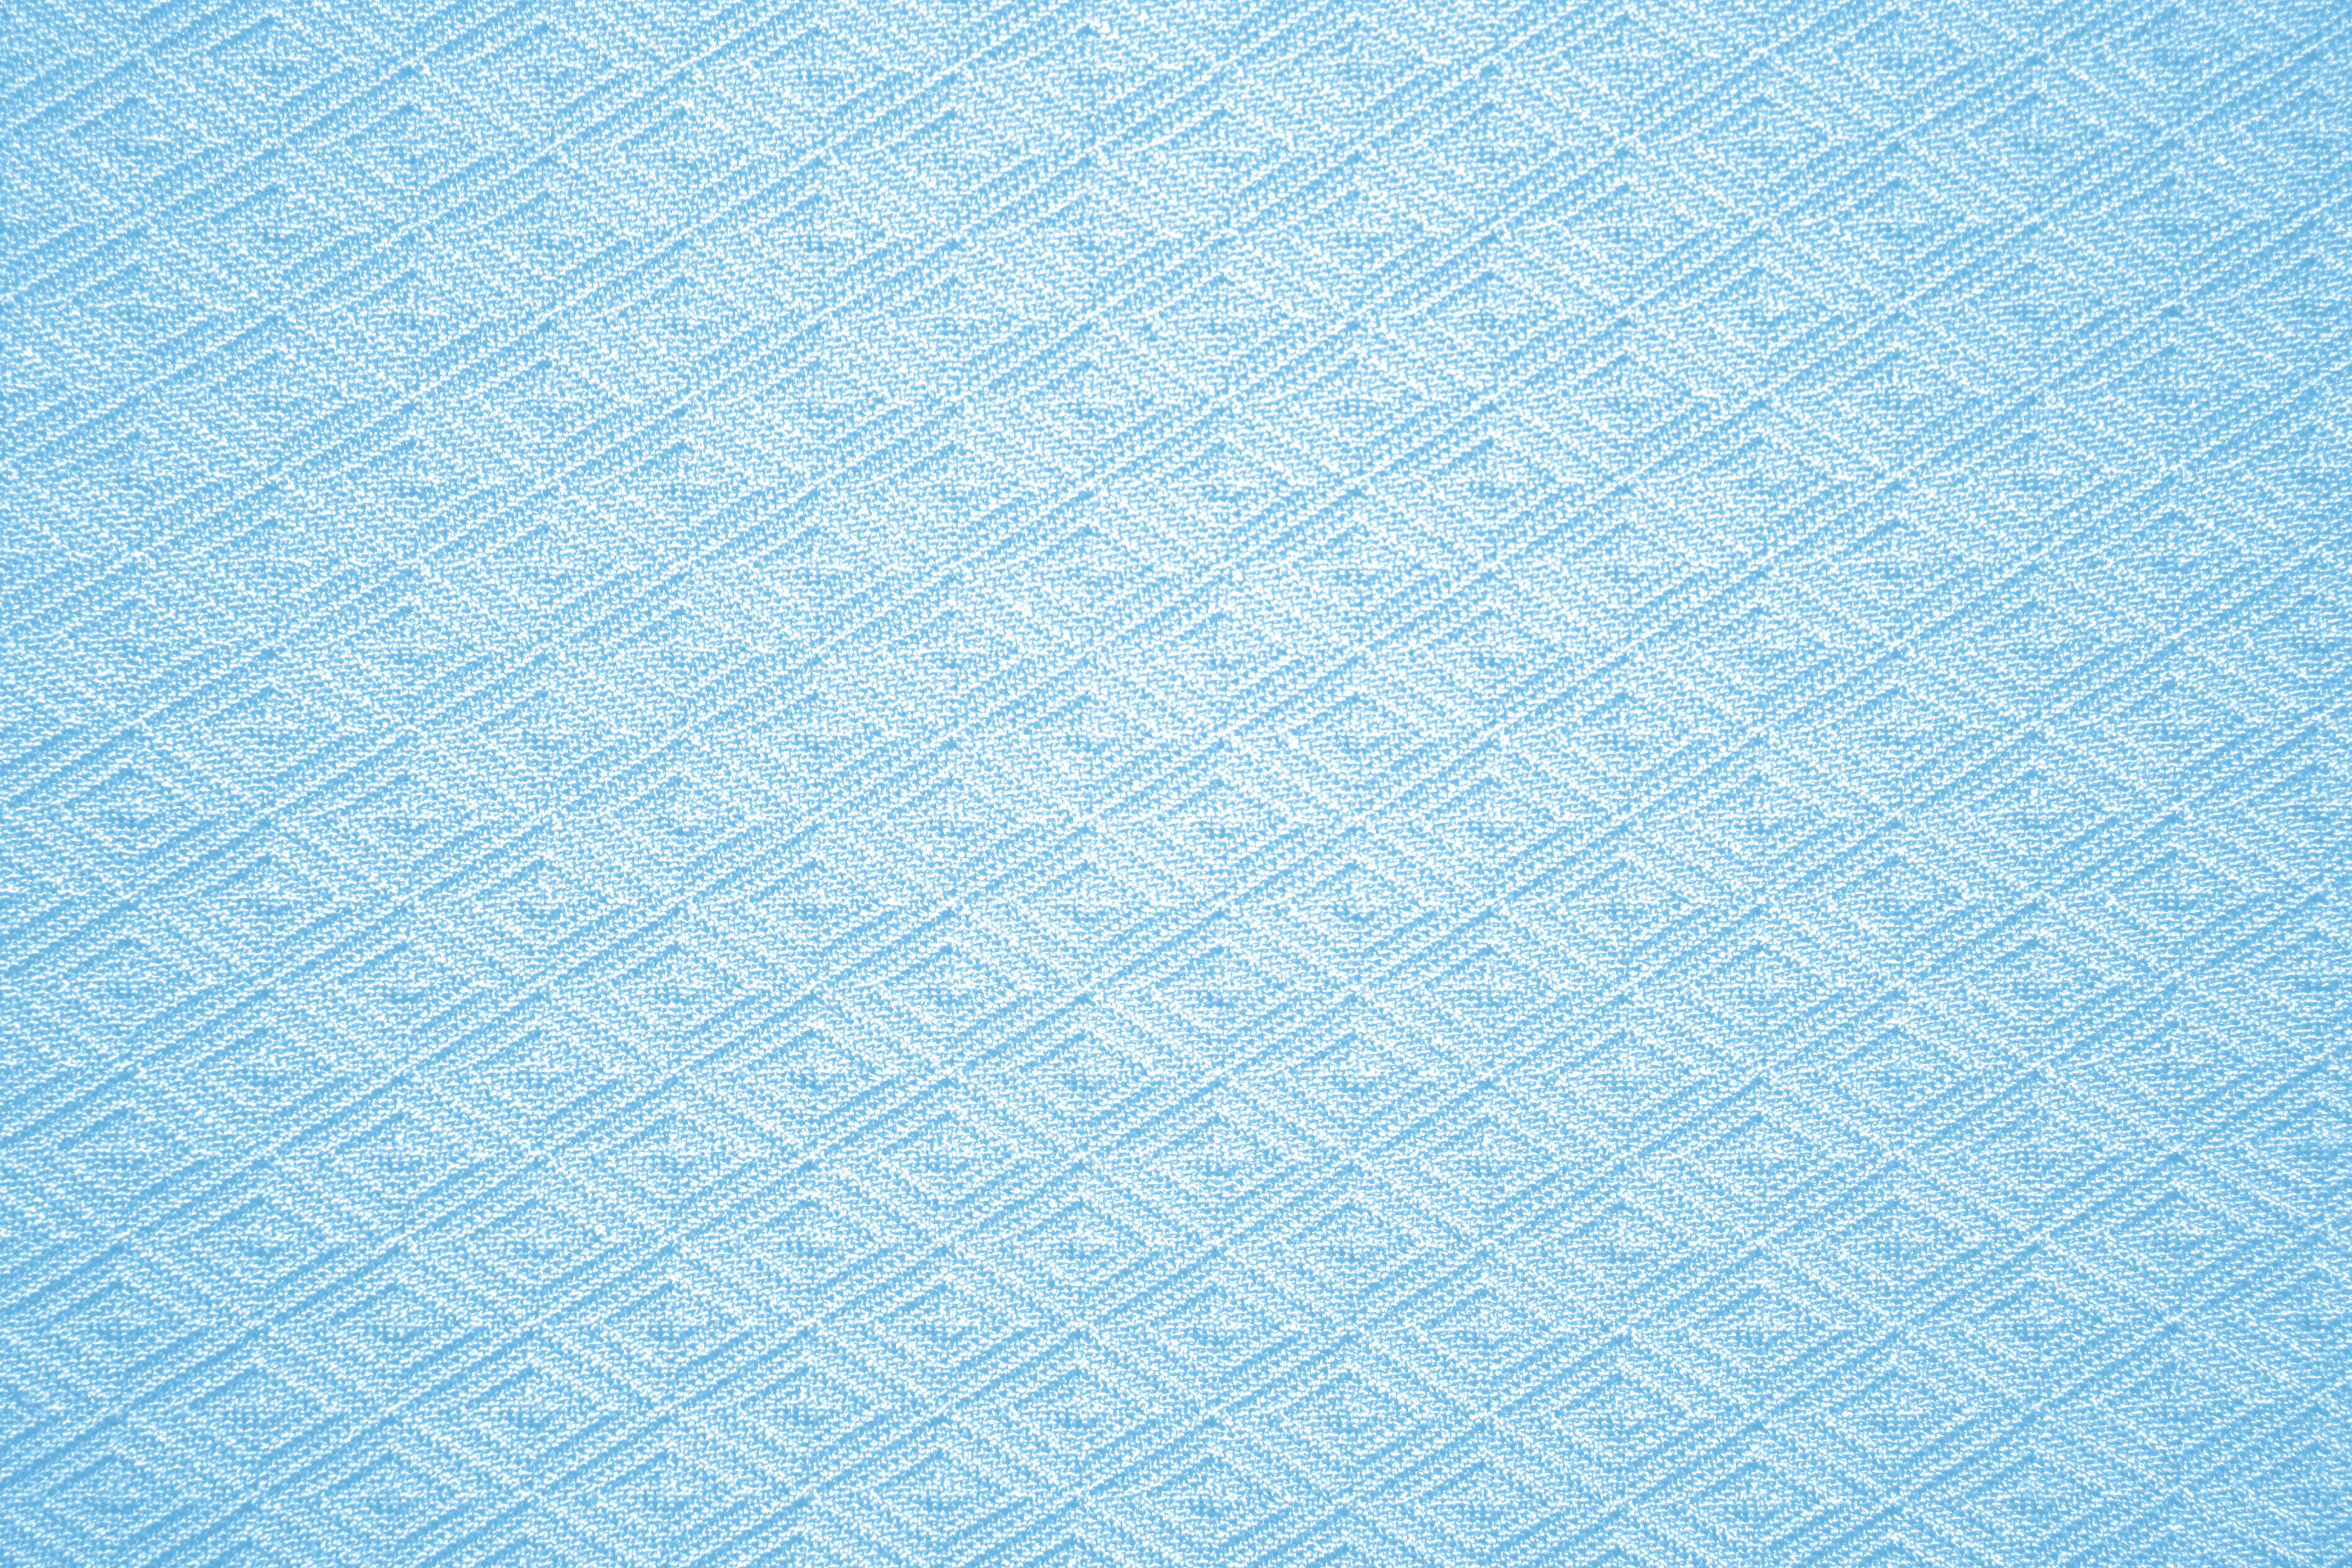 Baby Blue Knit Fabric With Diamond Pattern Texture Picture